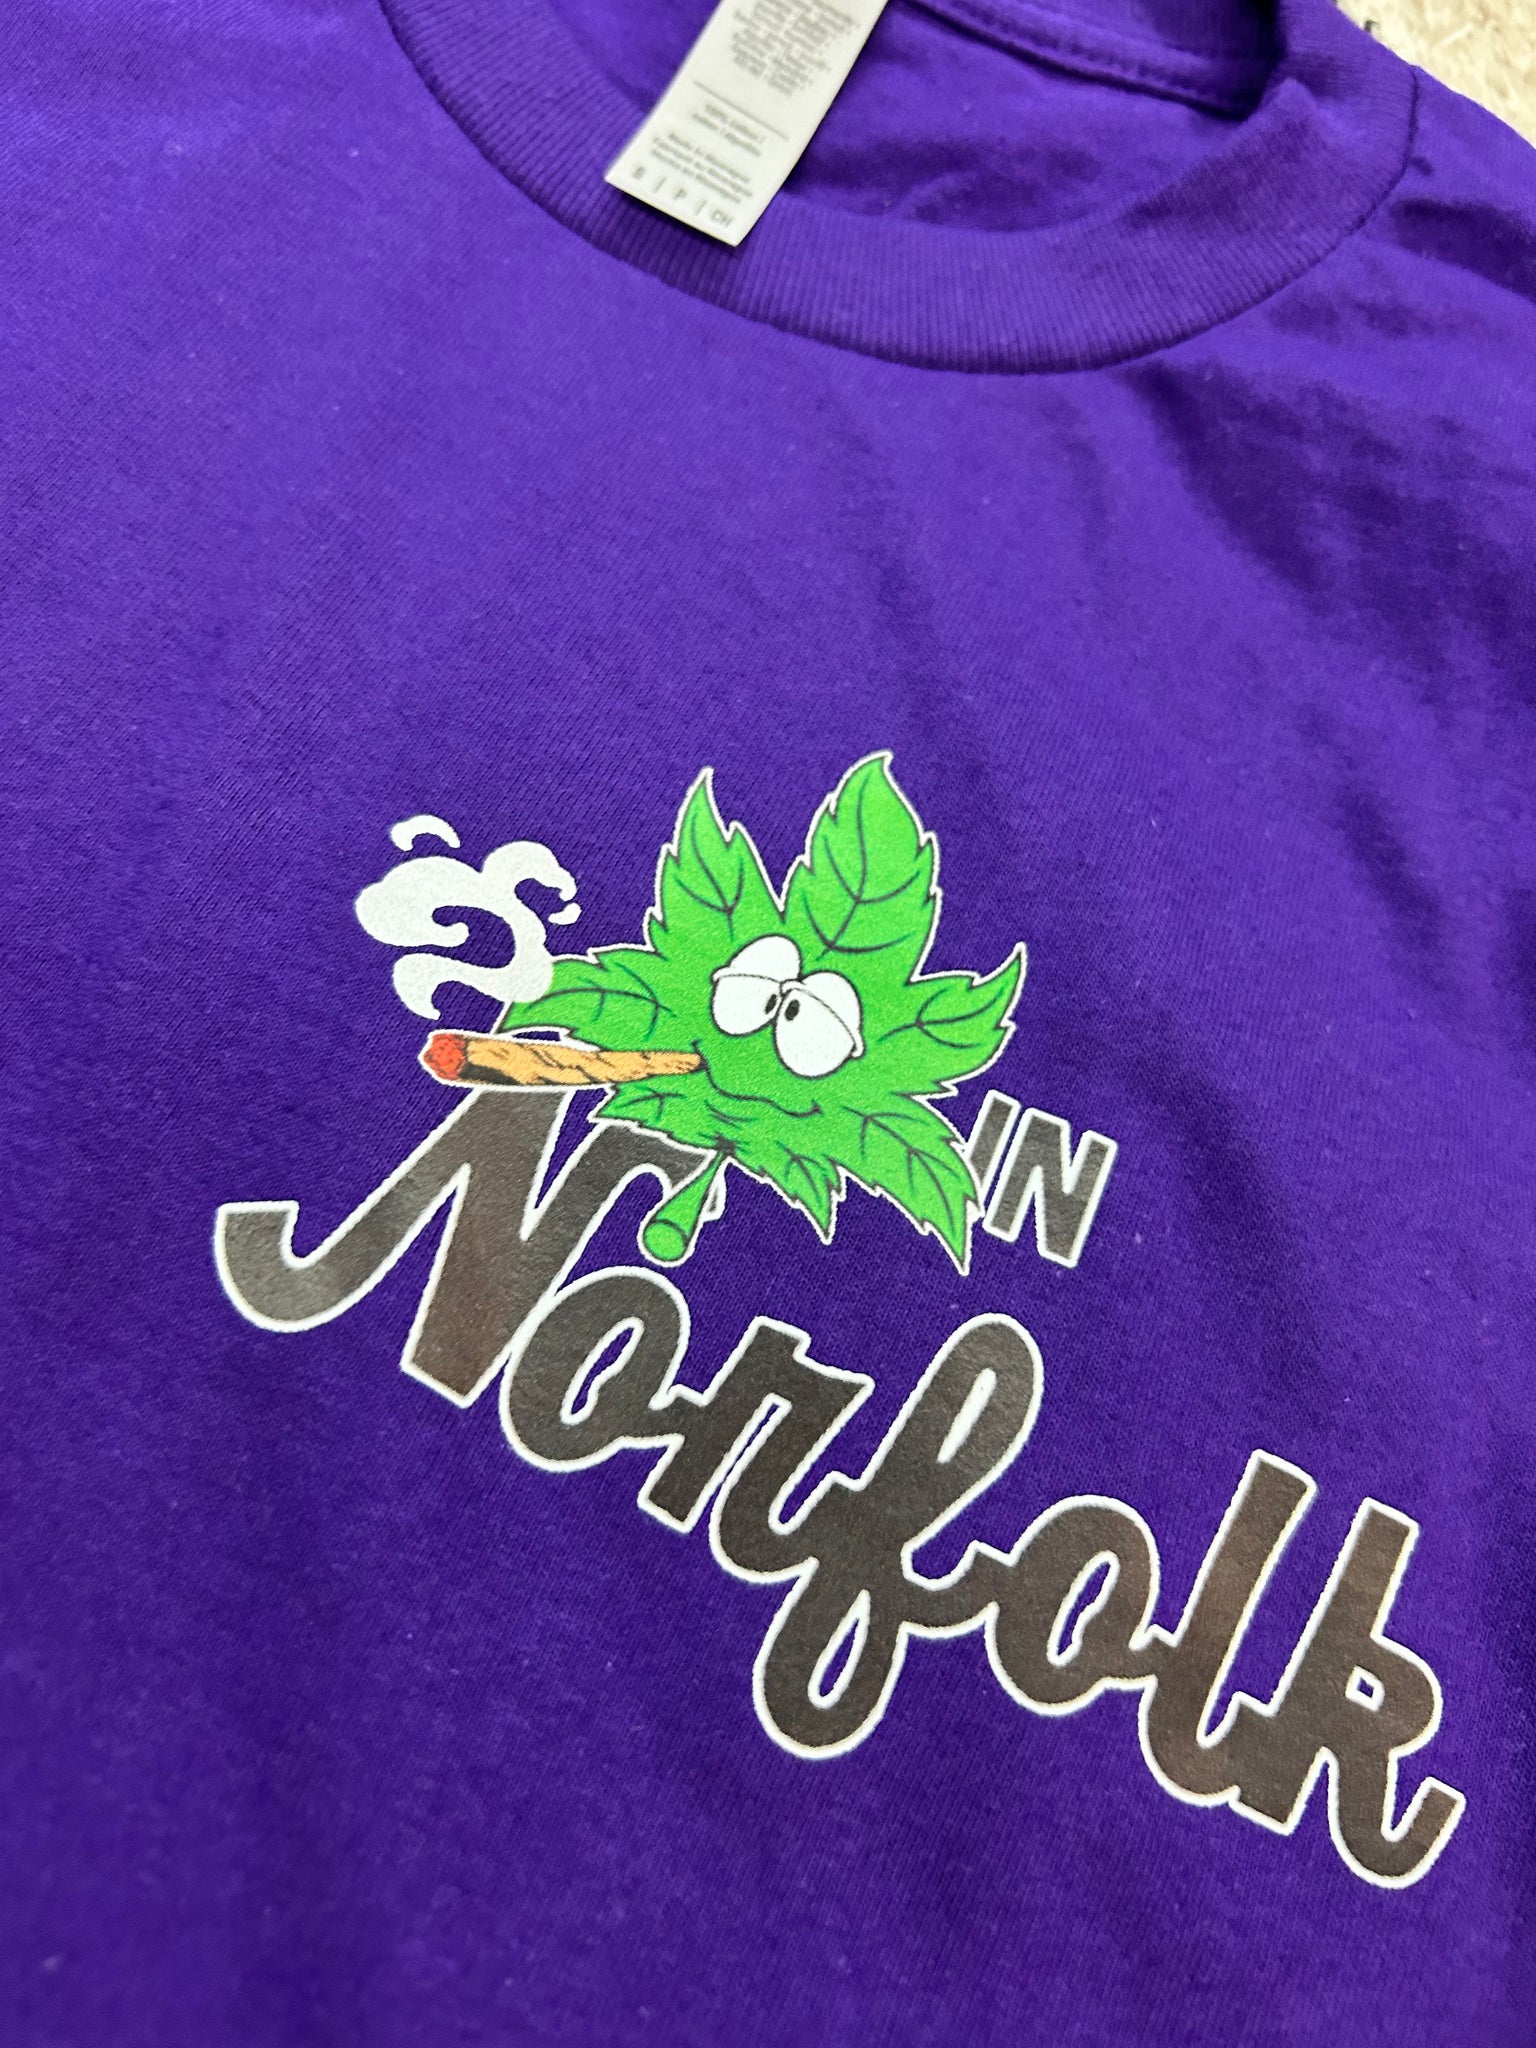 Made In Norfolk “Enthusiast” Tee